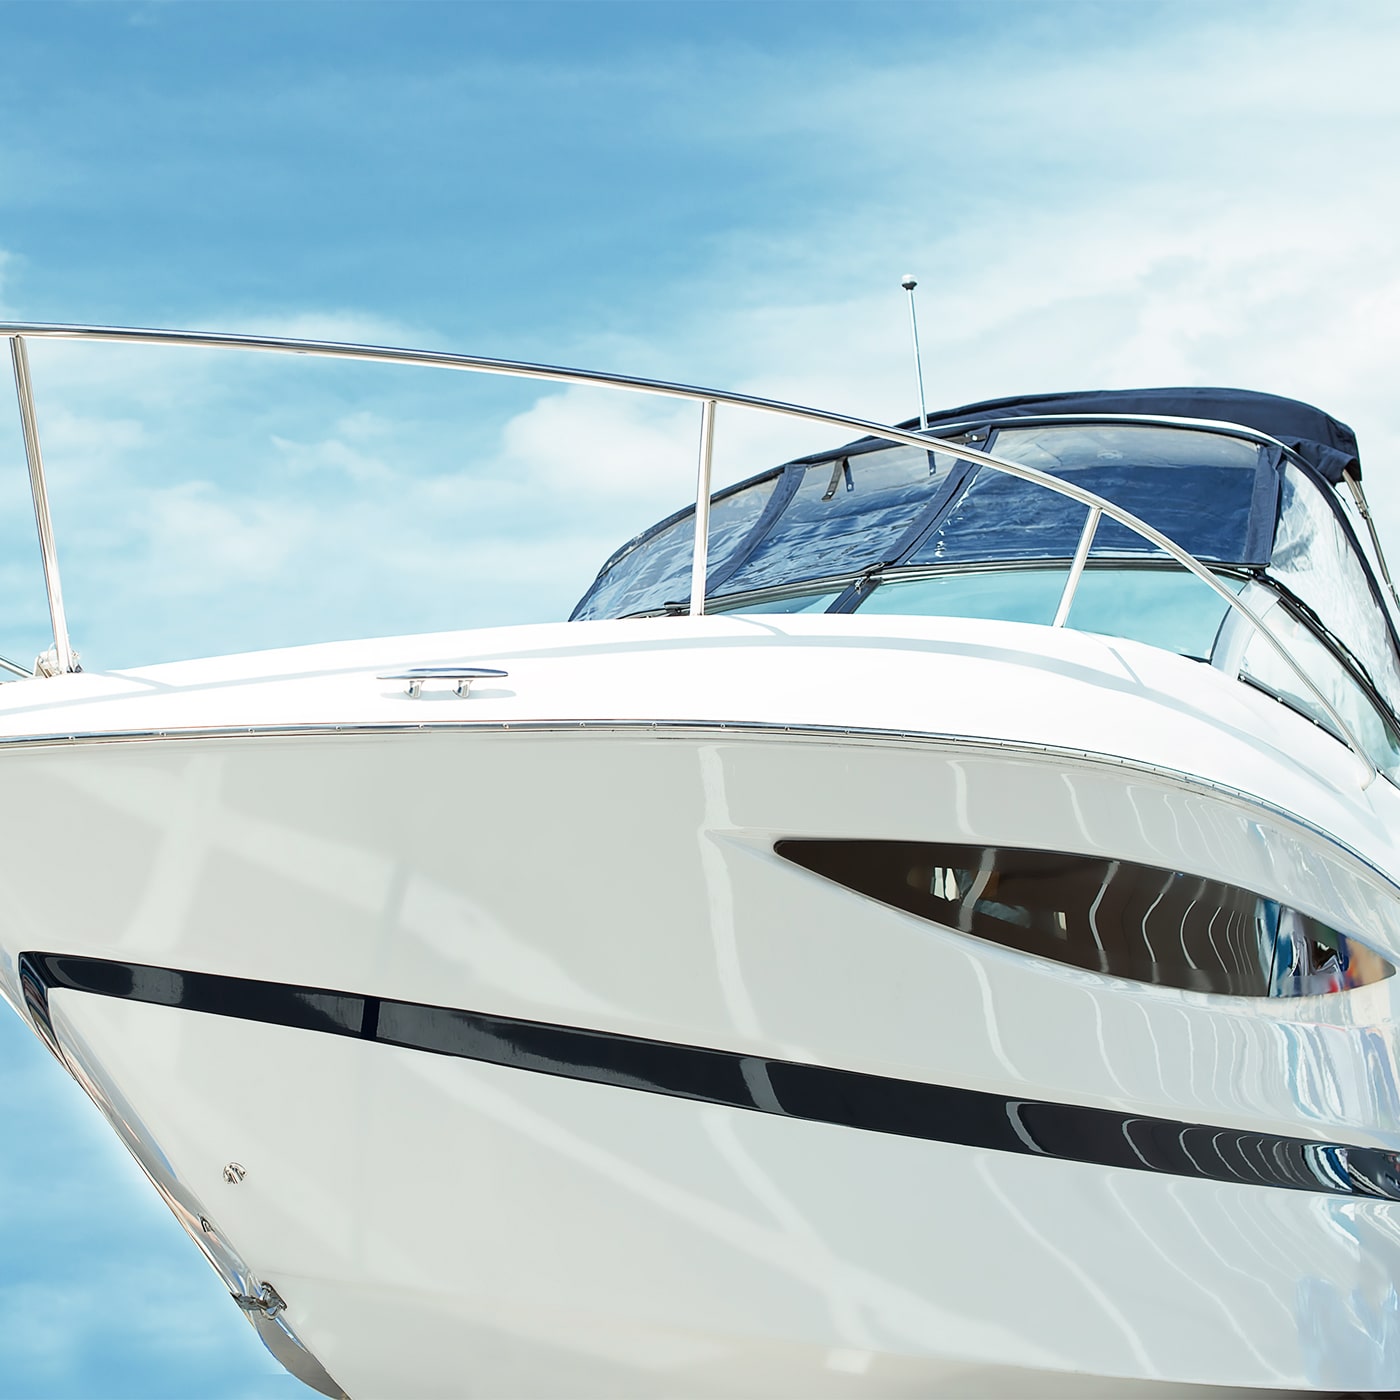 Winterizing Your Boat: What to Do and What to Avoid